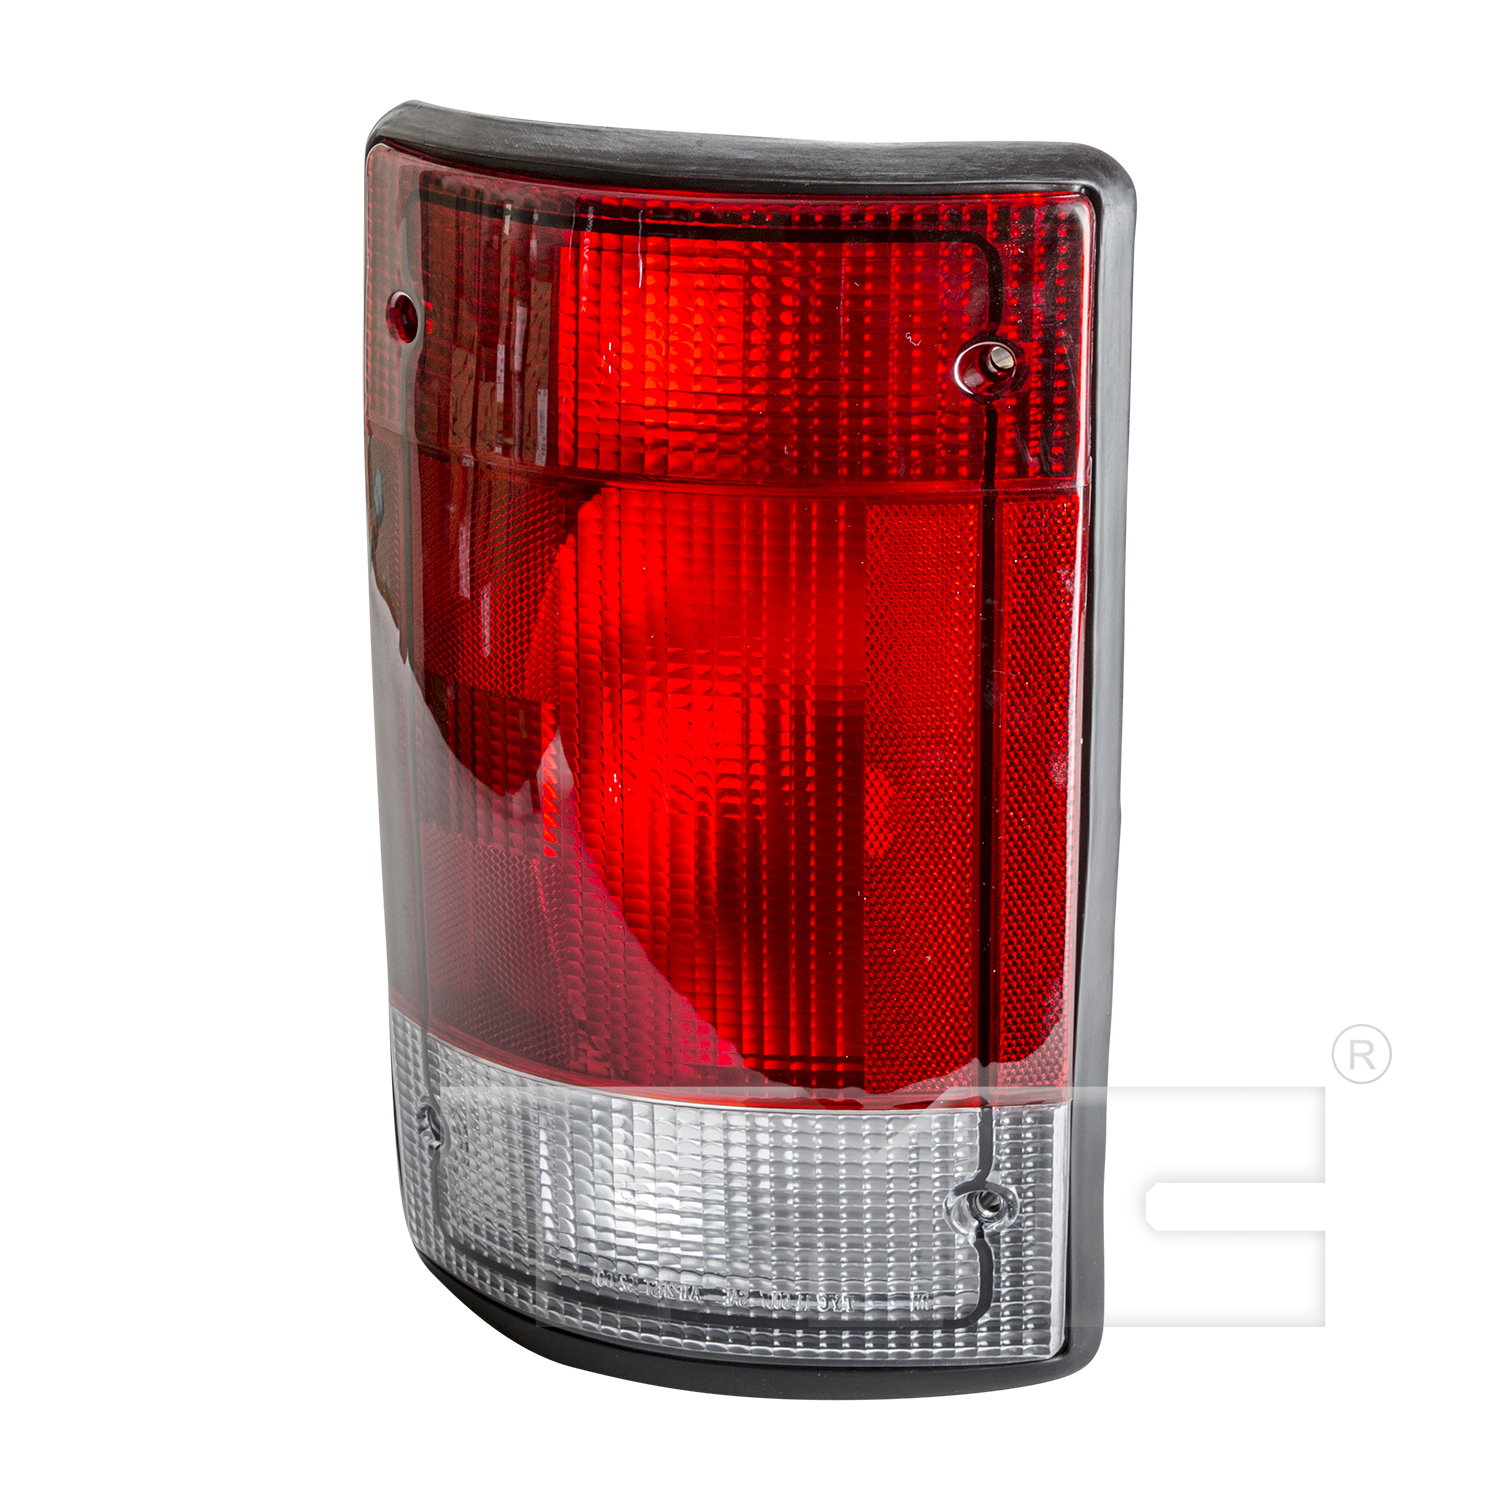 Aftermarket TAILLIGHTS for FORD - E-150 CLUB WAGON, E-150 CLUB WAGON,03-03,LT Taillamp assy